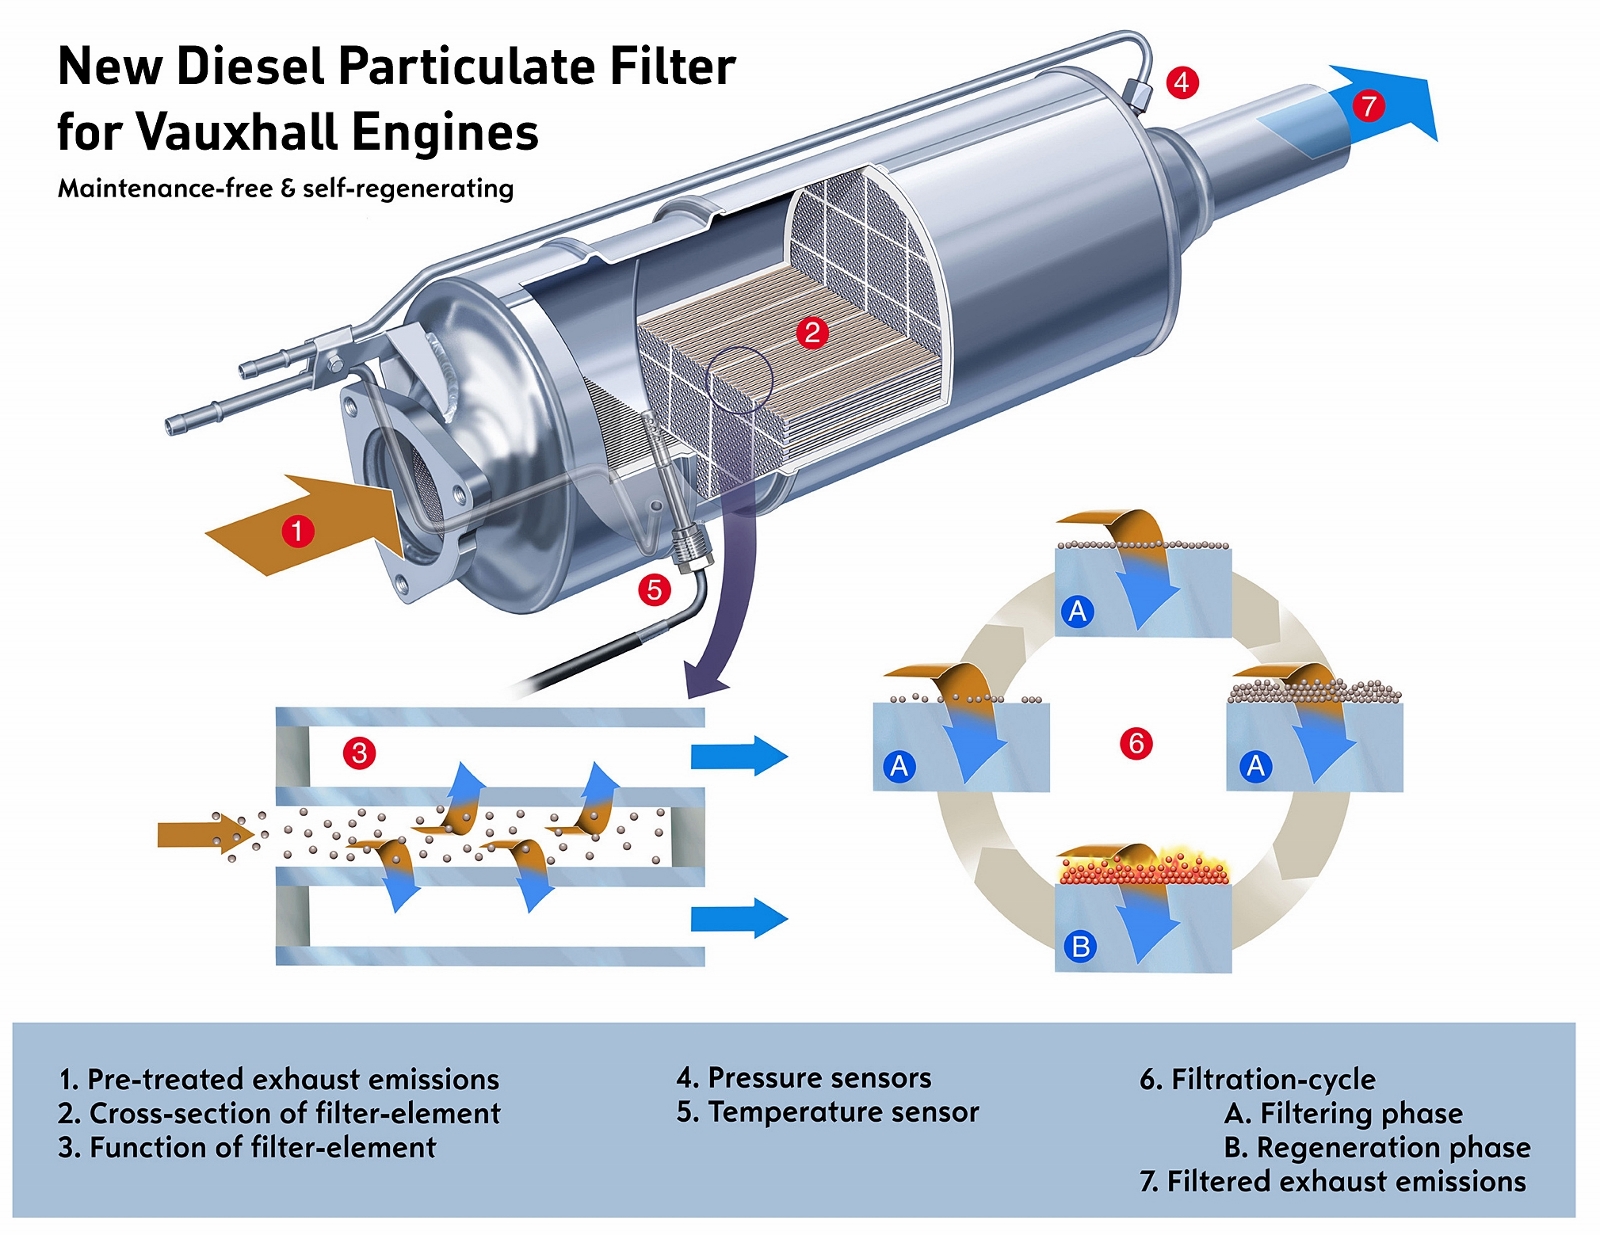 Method of cleaning diesel particulate filter - HHO 6.0